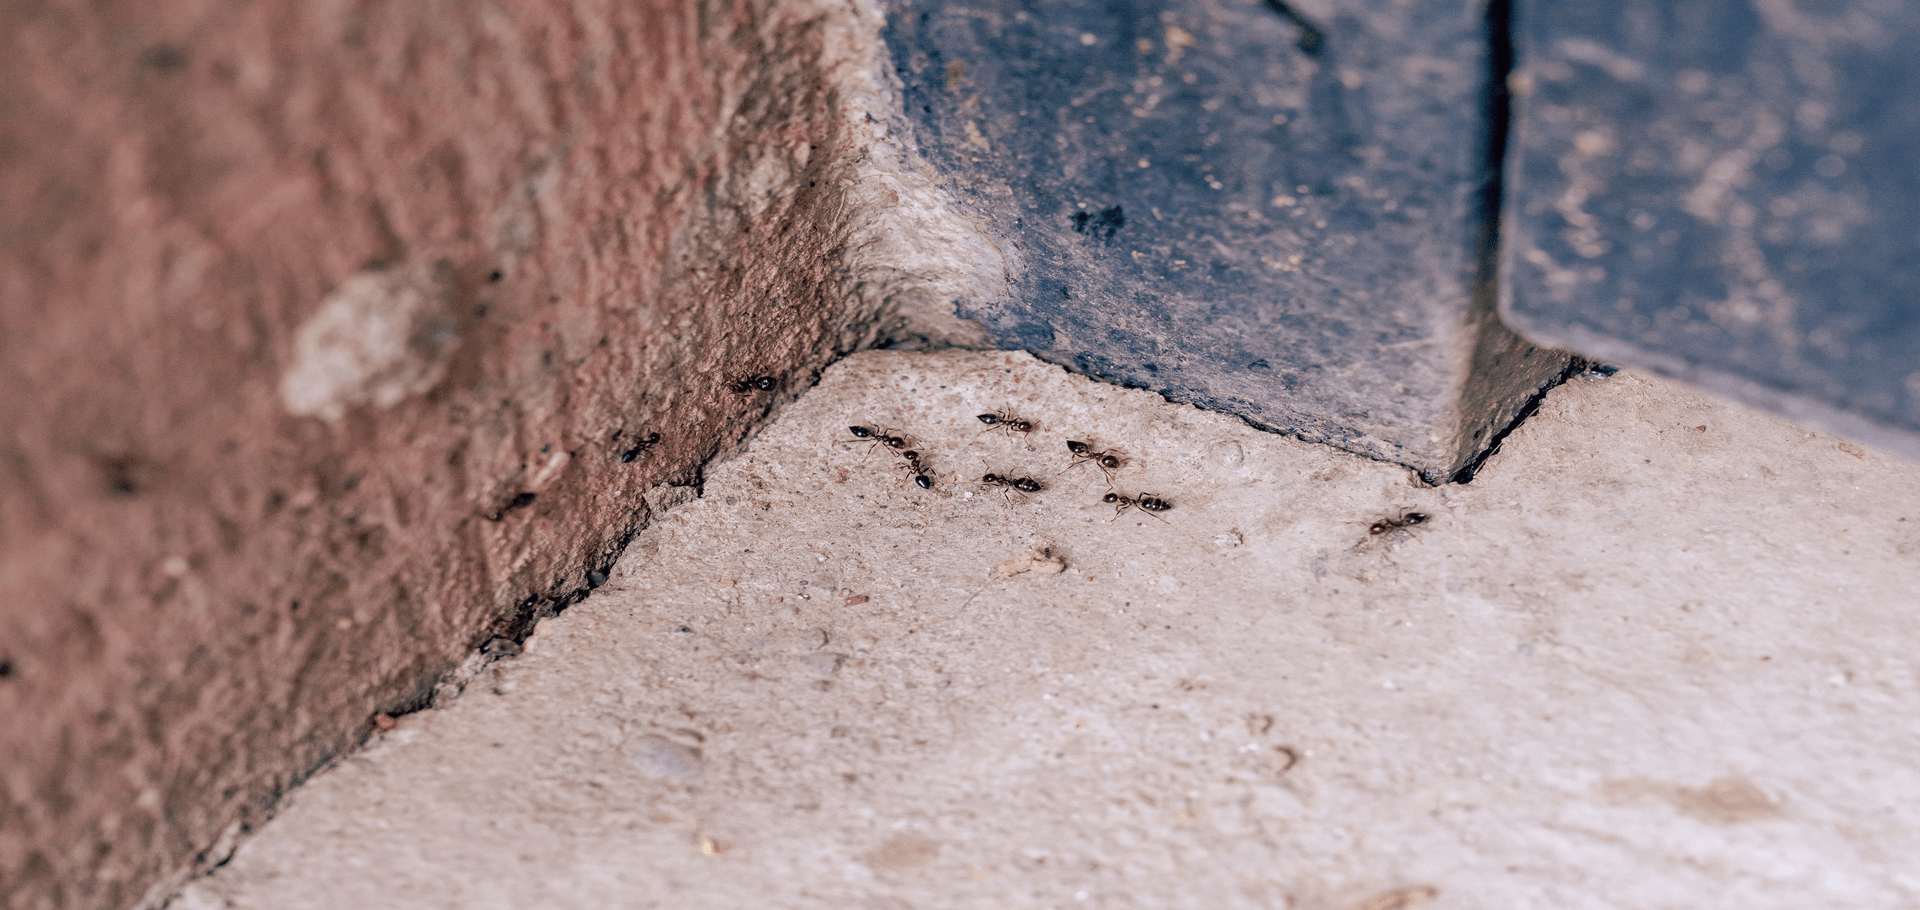 Do Ants Come Out In The Winter?